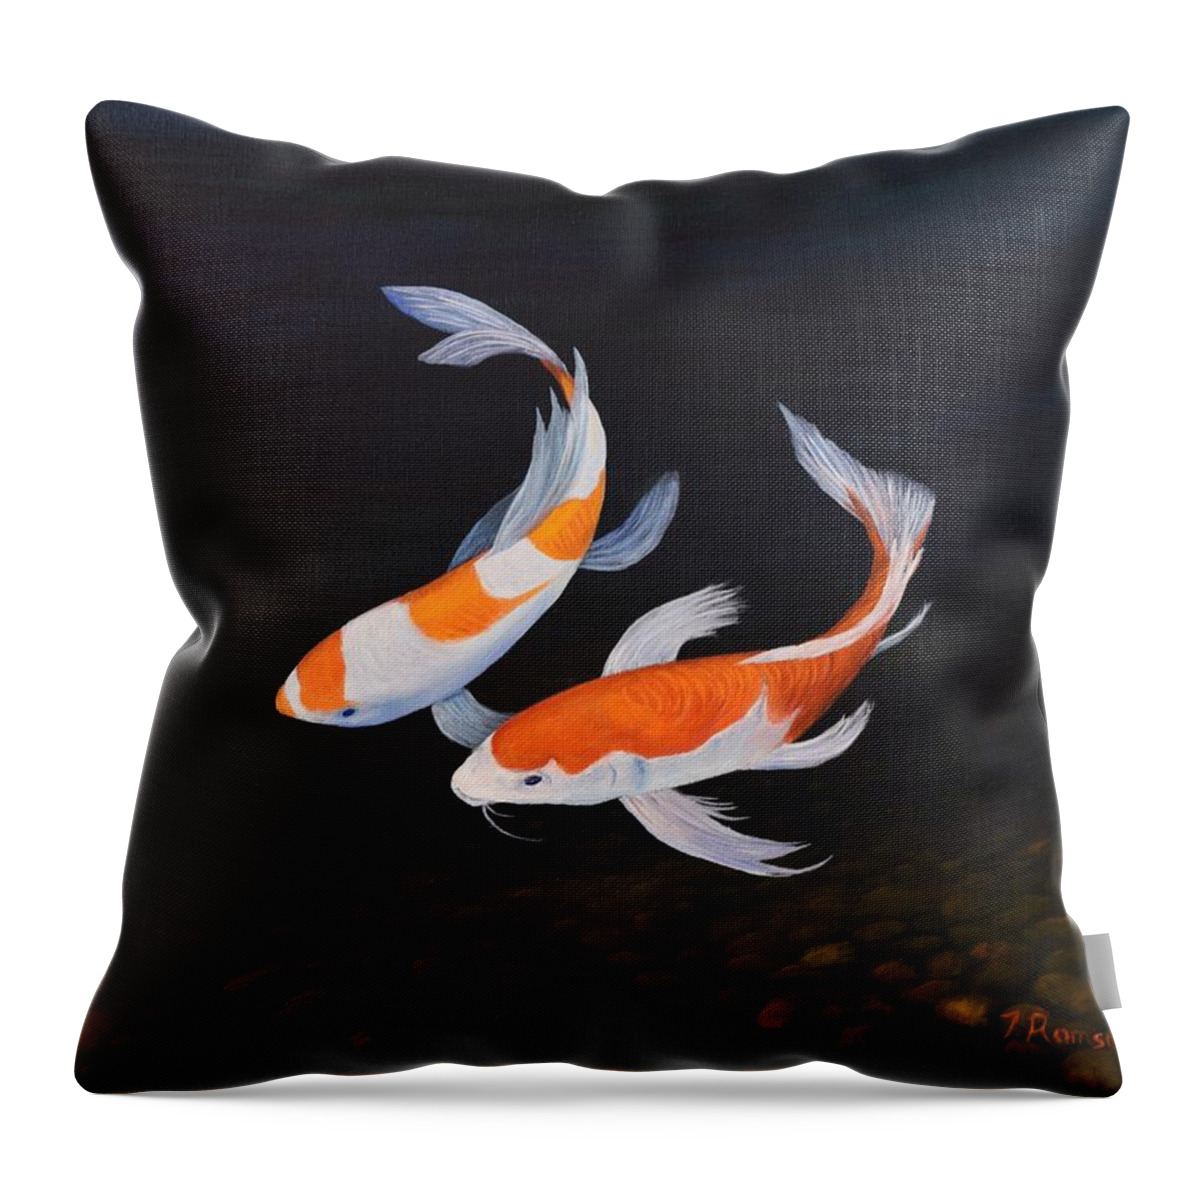 Koi Throw Pillow featuring the painting Koi Love by Torrence Ramsundar